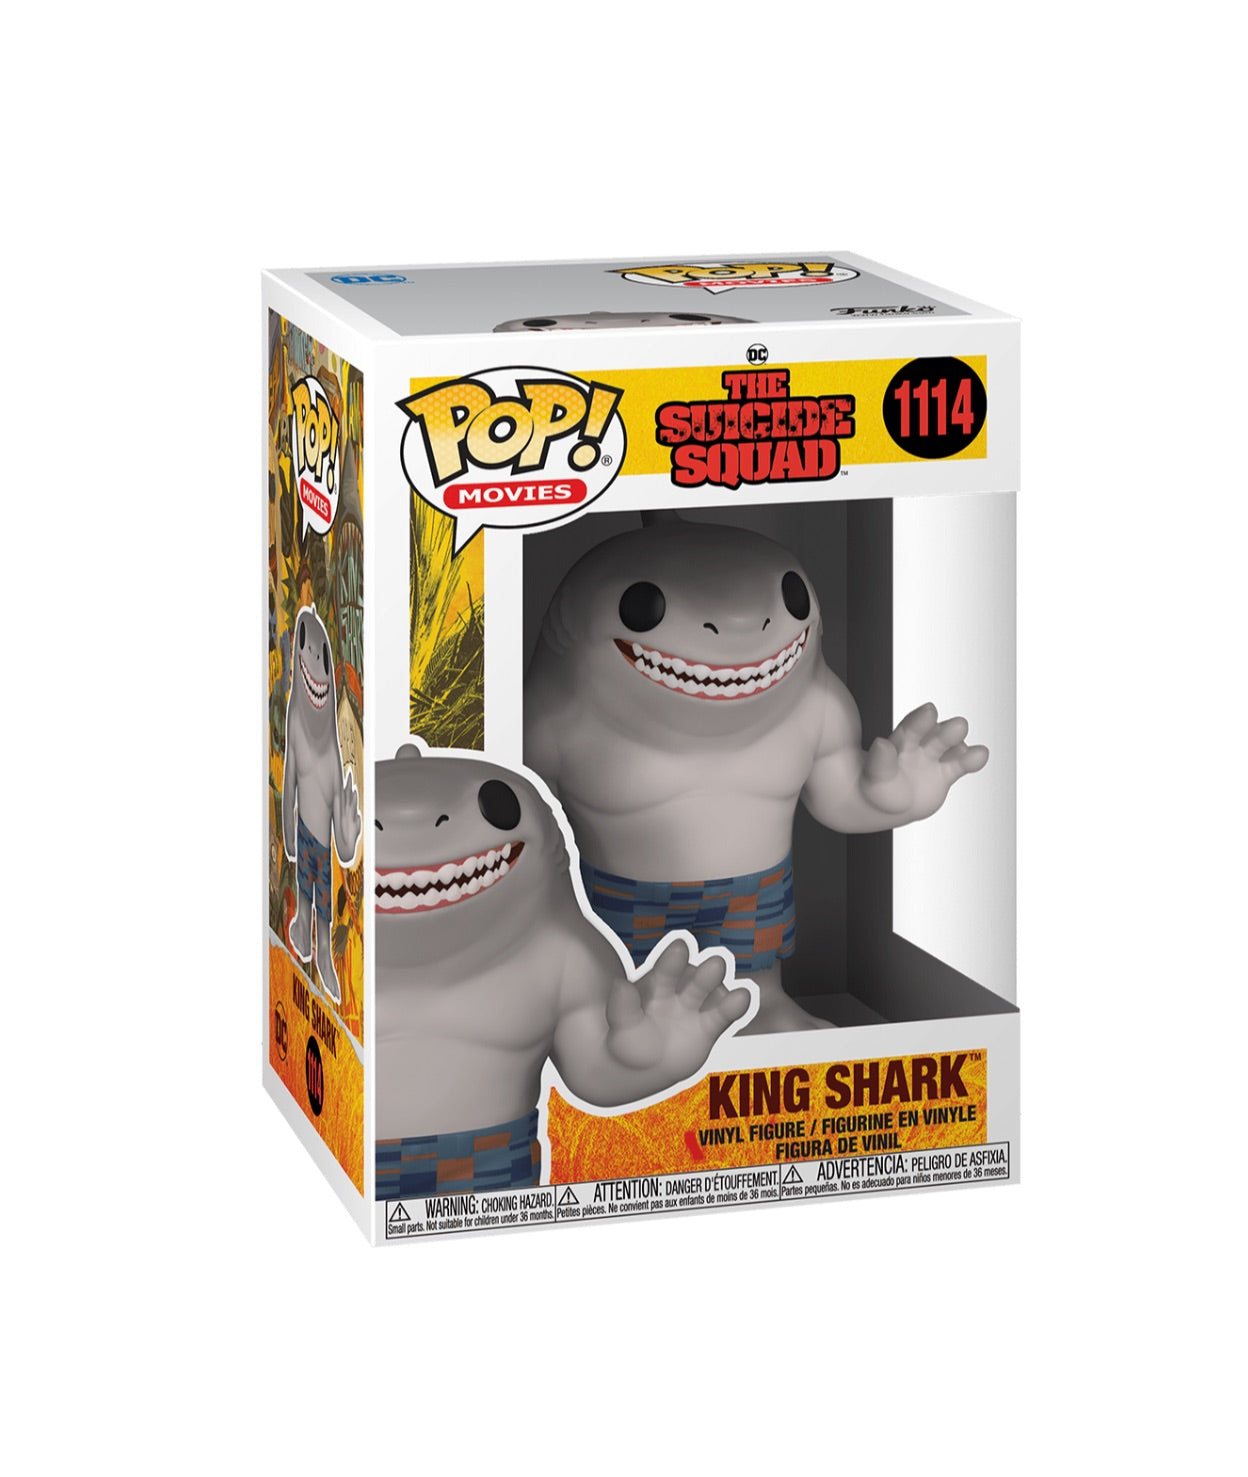 POP! Movies Suicide Squad King Shark #1114